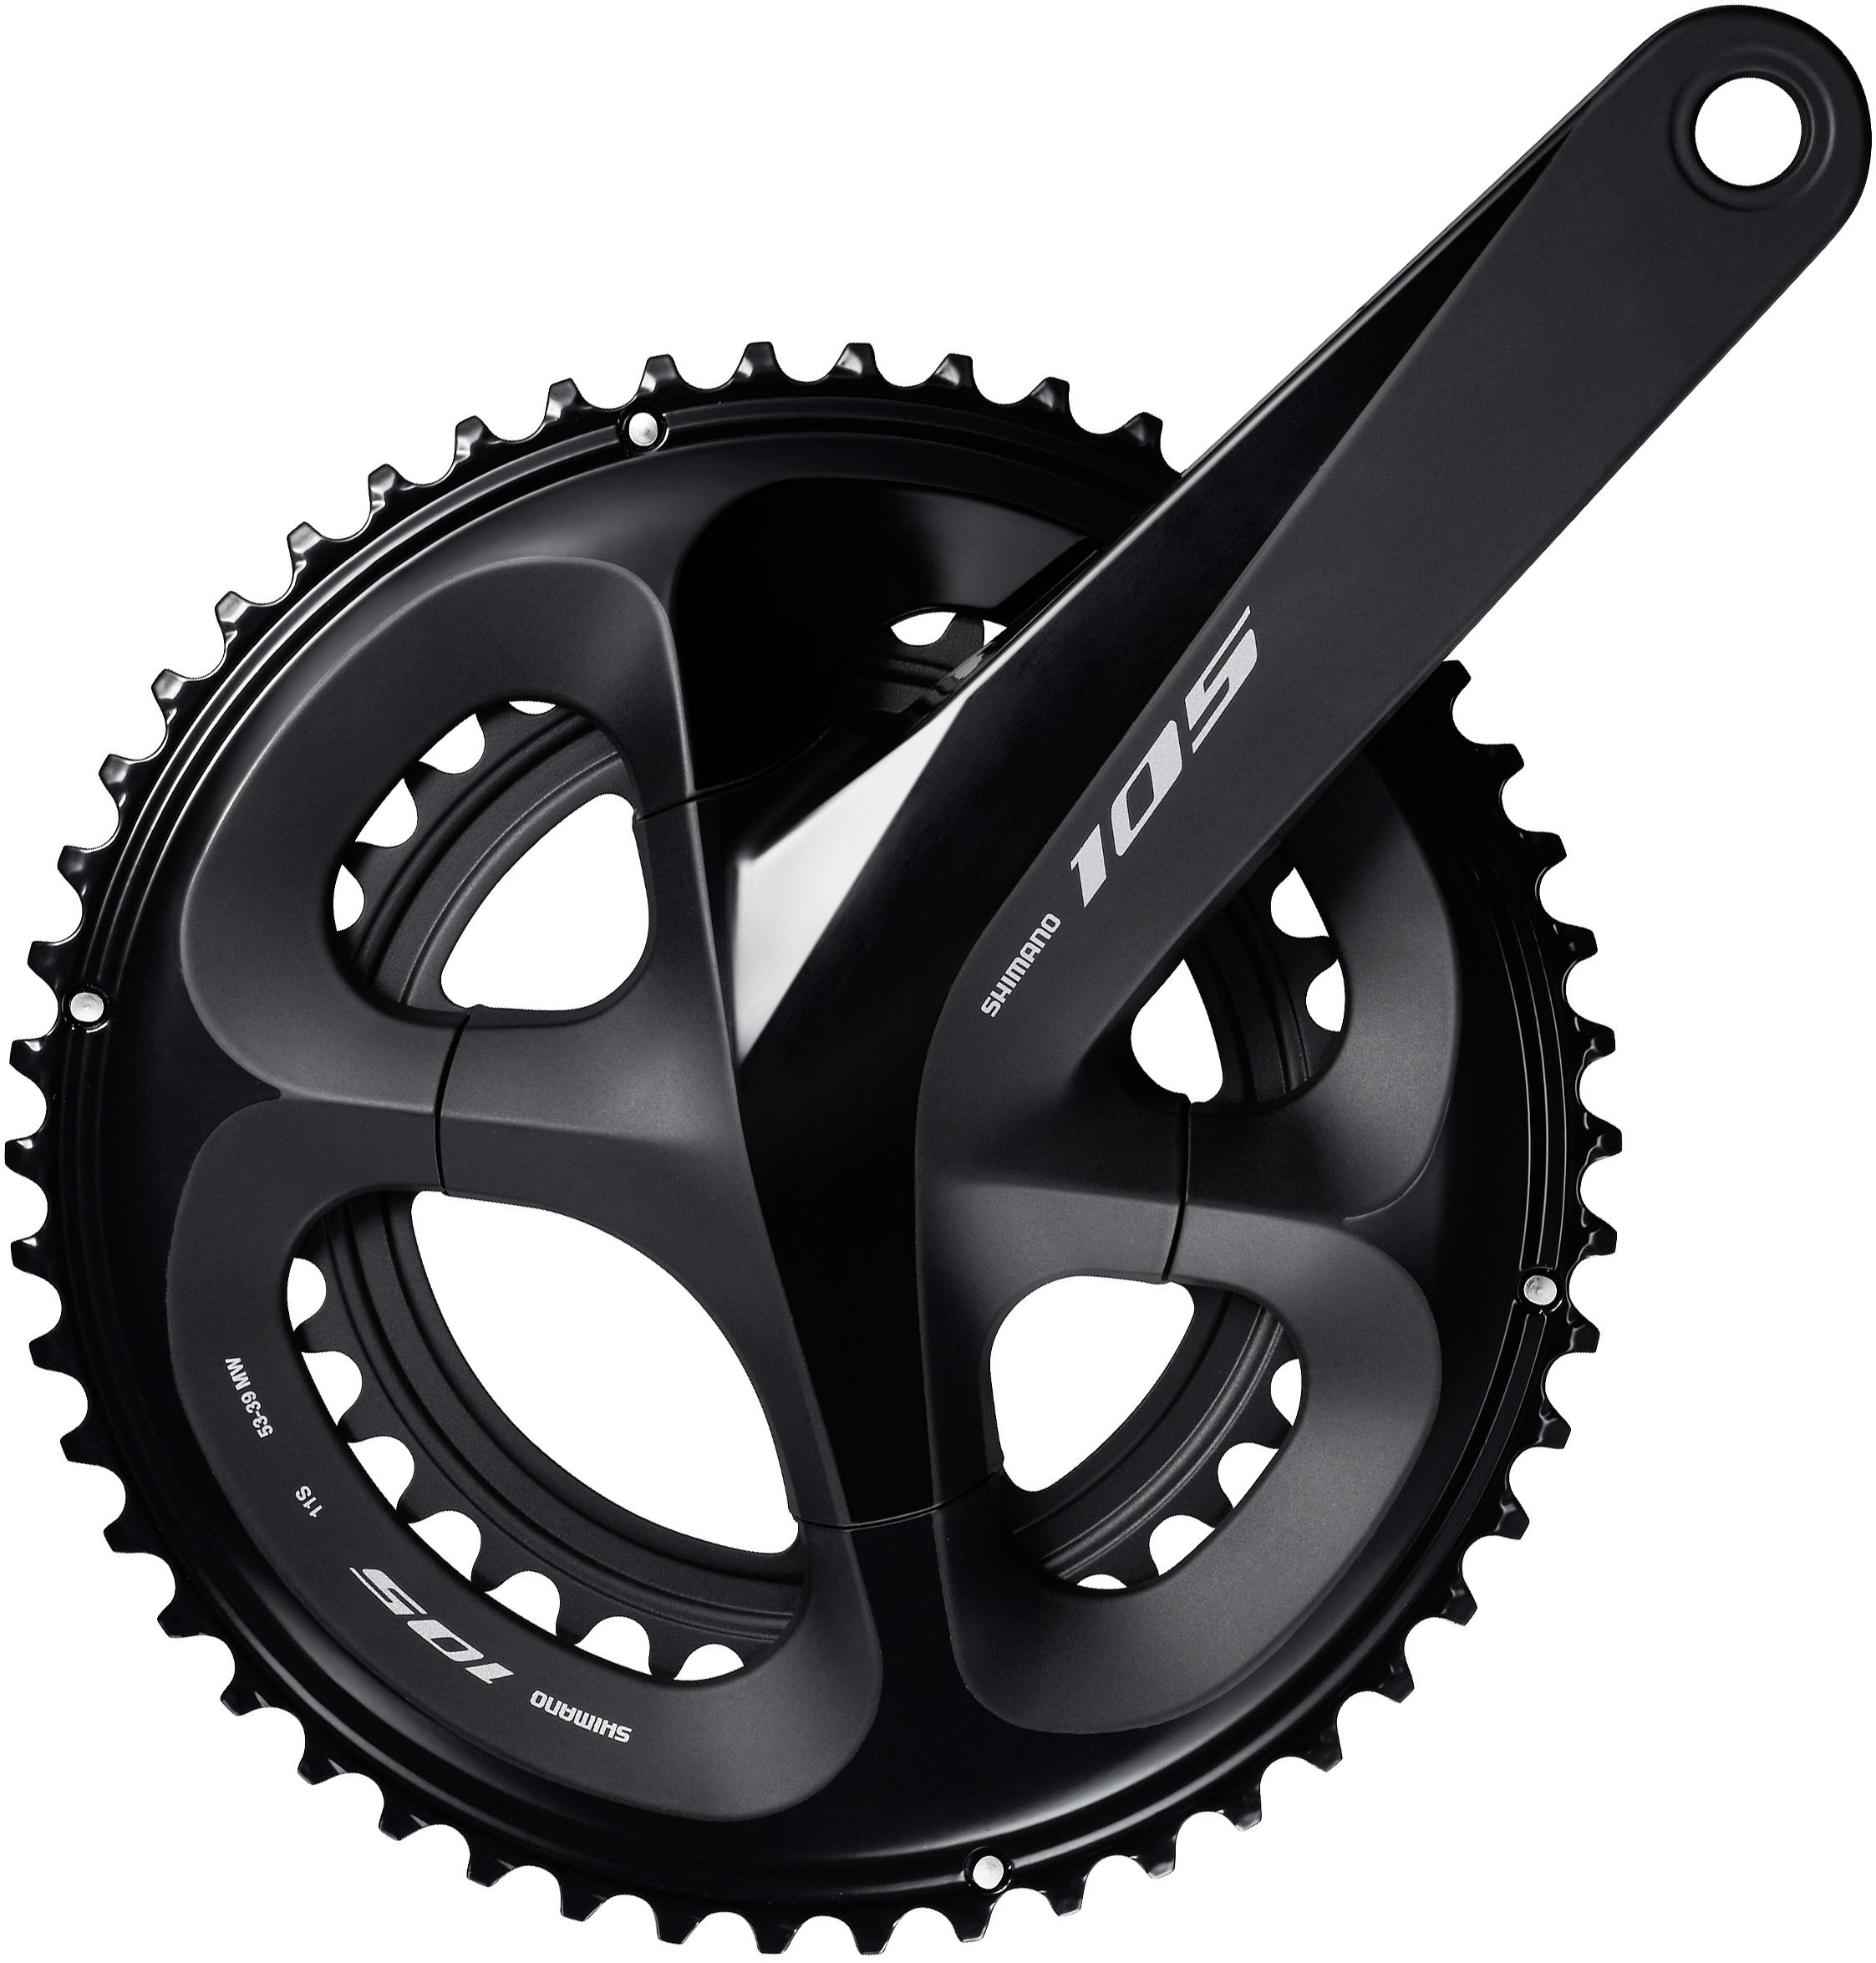 Shimano 105 R7000 11 Speed Double Chainset - Black